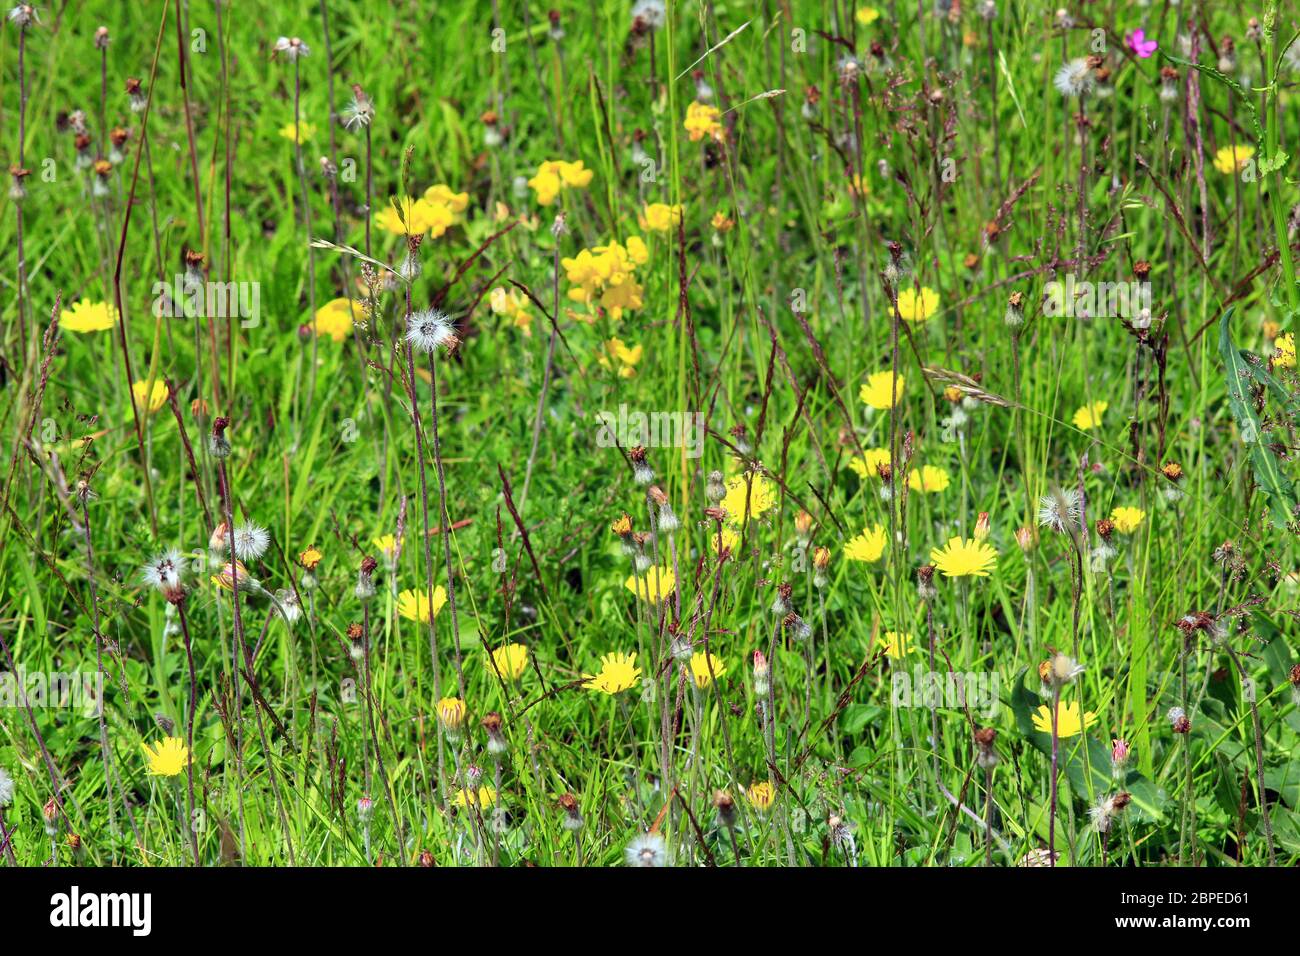 meadow flowers of Galium verum, Sonchus arvensis and dandelions in the green grass Stock Photo